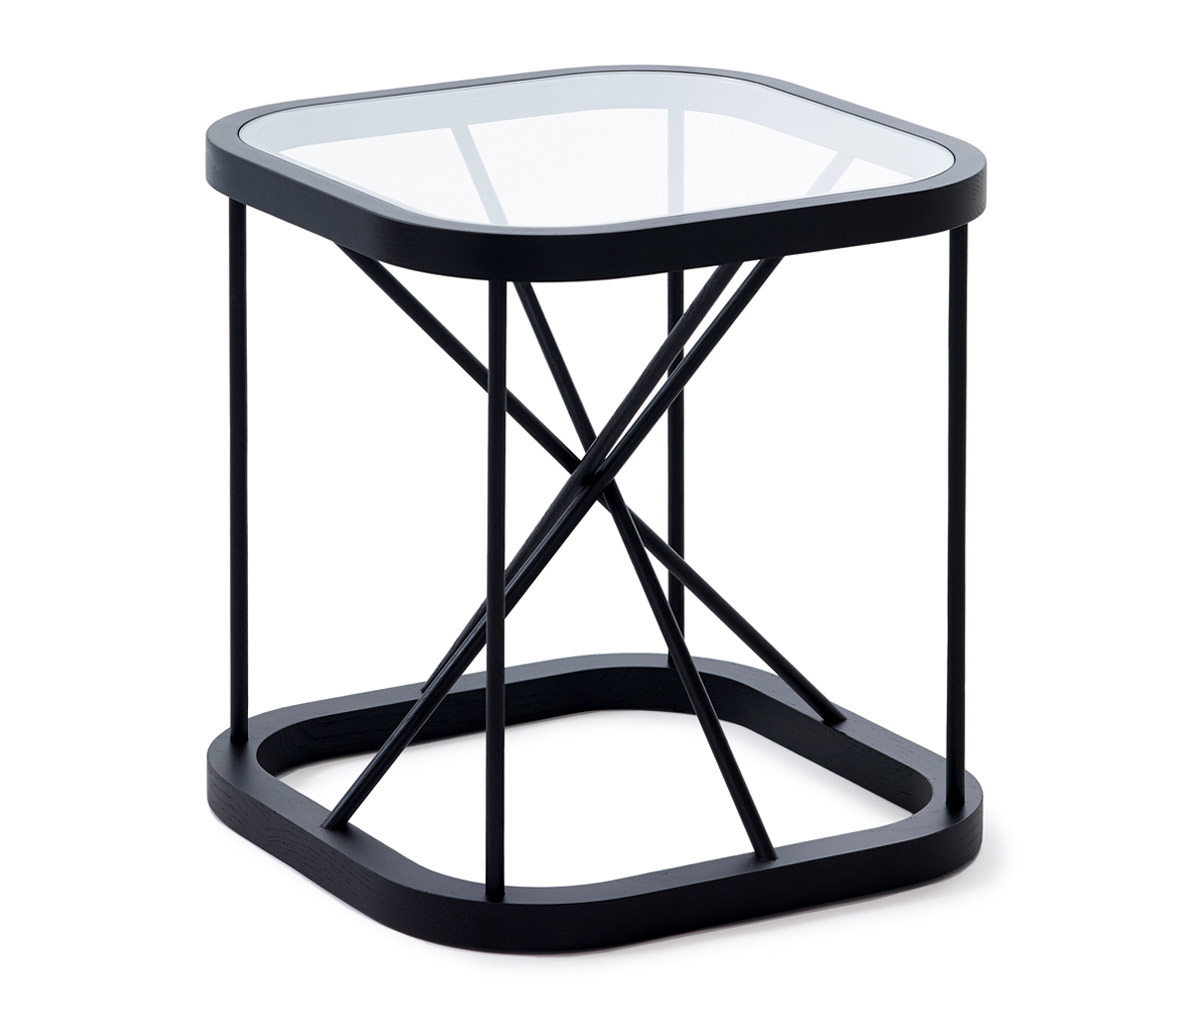 Woodnotes Twiggy Side Table Black, 44 x 44 cm